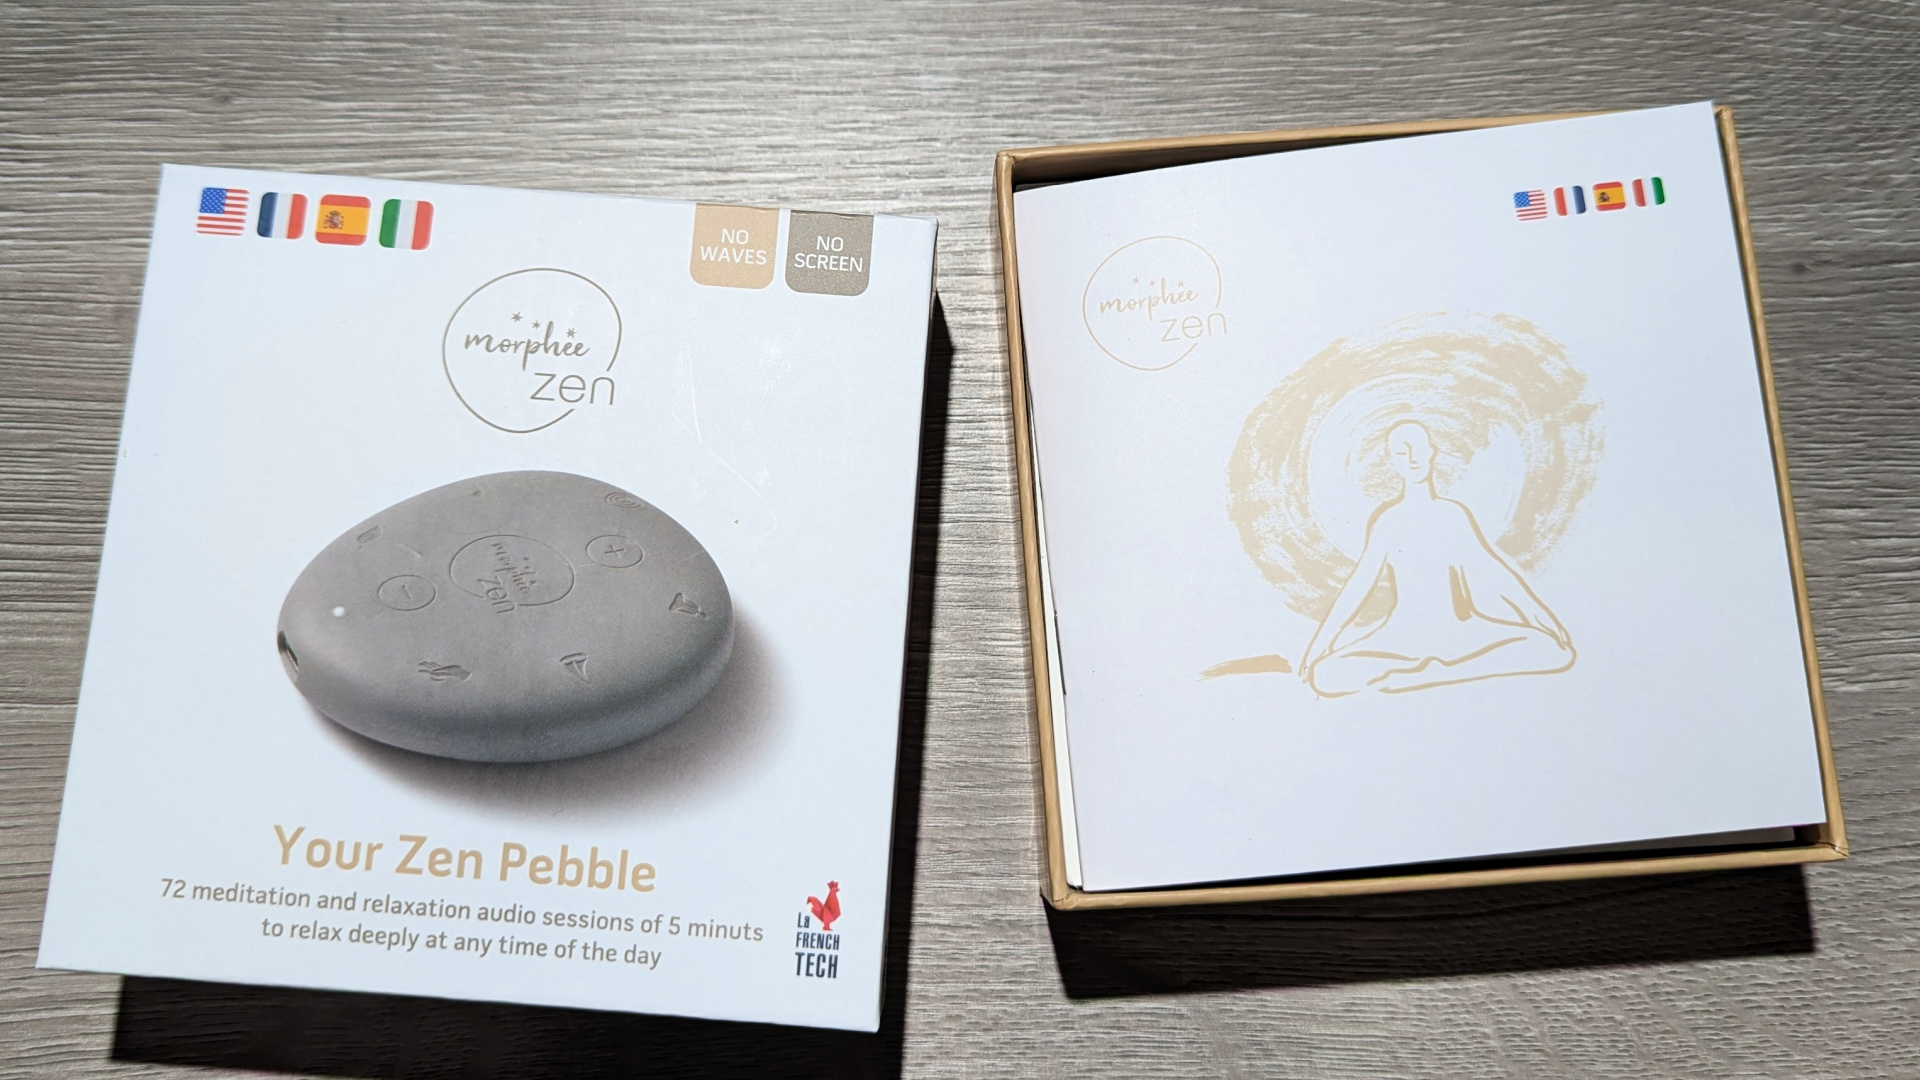 The new Morphee Zen device can help you manage your anxiety and